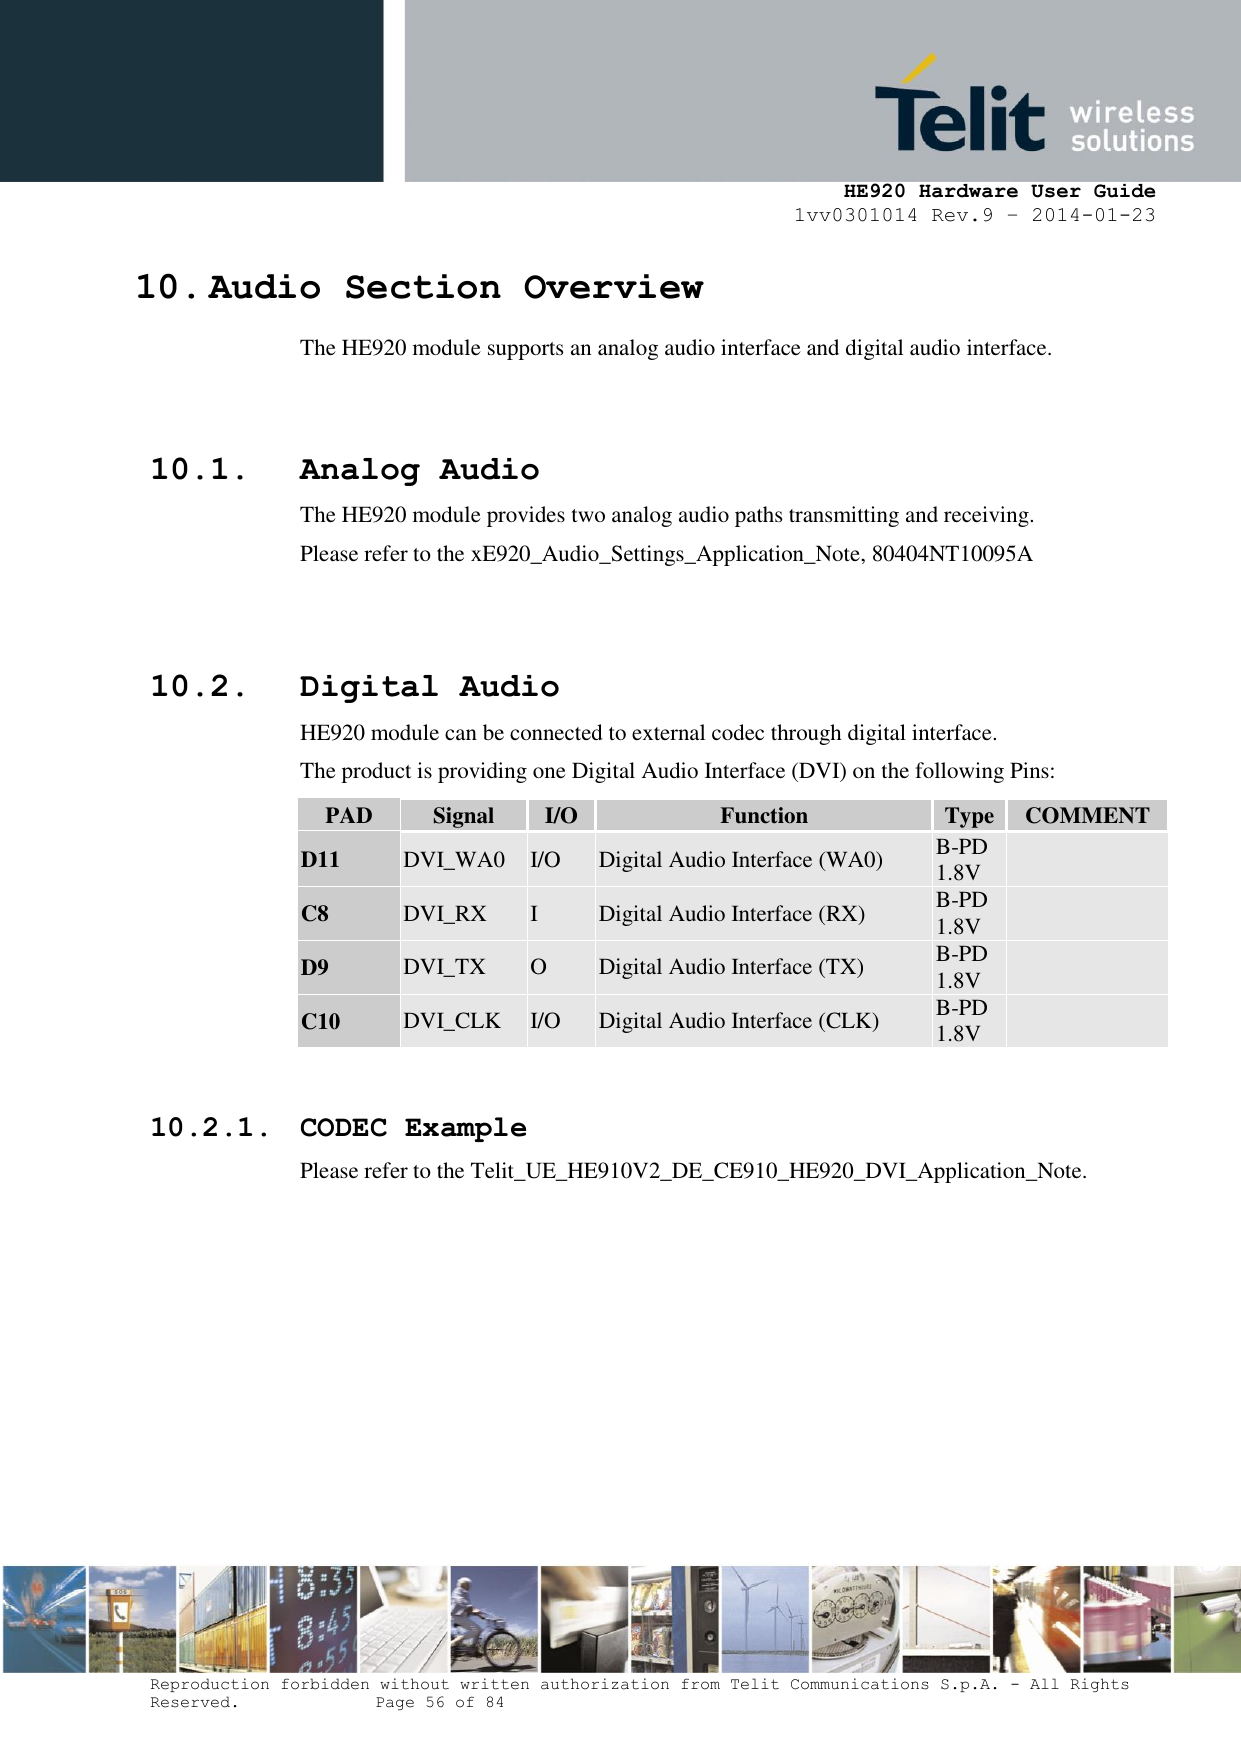     HE920 Hardware User Guide 1vv0301014 Rev.9 – 2014-01-23 Reproduction forbidden without written authorization from Telit Communications S.p.A. - All Rights Reserved.    Page 56 of 84  10. Audio Section Overview The HE920 module supports an analog audio interface and digital audio interface.   10.1. Analog Audio The HE920 module provides two analog audio paths transmitting and receiving. Please refer to the xE920_Audio_Settings_Application_Note, 80404NT10095A   10.2. Digital Audio HE920 module can be connected to external codec through digital interface. The product is providing one Digital Audio Interface (DVI) on the following Pins: PAD Signal I/O Function Type COMMENT D11 DVI_WA0 I/O Digital Audio Interface (WA0) B-PD 1.8V  C8 DVI_RX I Digital Audio Interface (RX) B-PD 1.8V  D9 DVI_TX O Digital Audio Interface (TX) B-PD 1.8V  C10 DVI_CLK I/O Digital Audio Interface (CLK) B-PD 1.8V   10.2.1. CODEC Example Please refer to the Telit_UE_HE910V2_DE_CE910_HE920_DVI_Application_Note.       